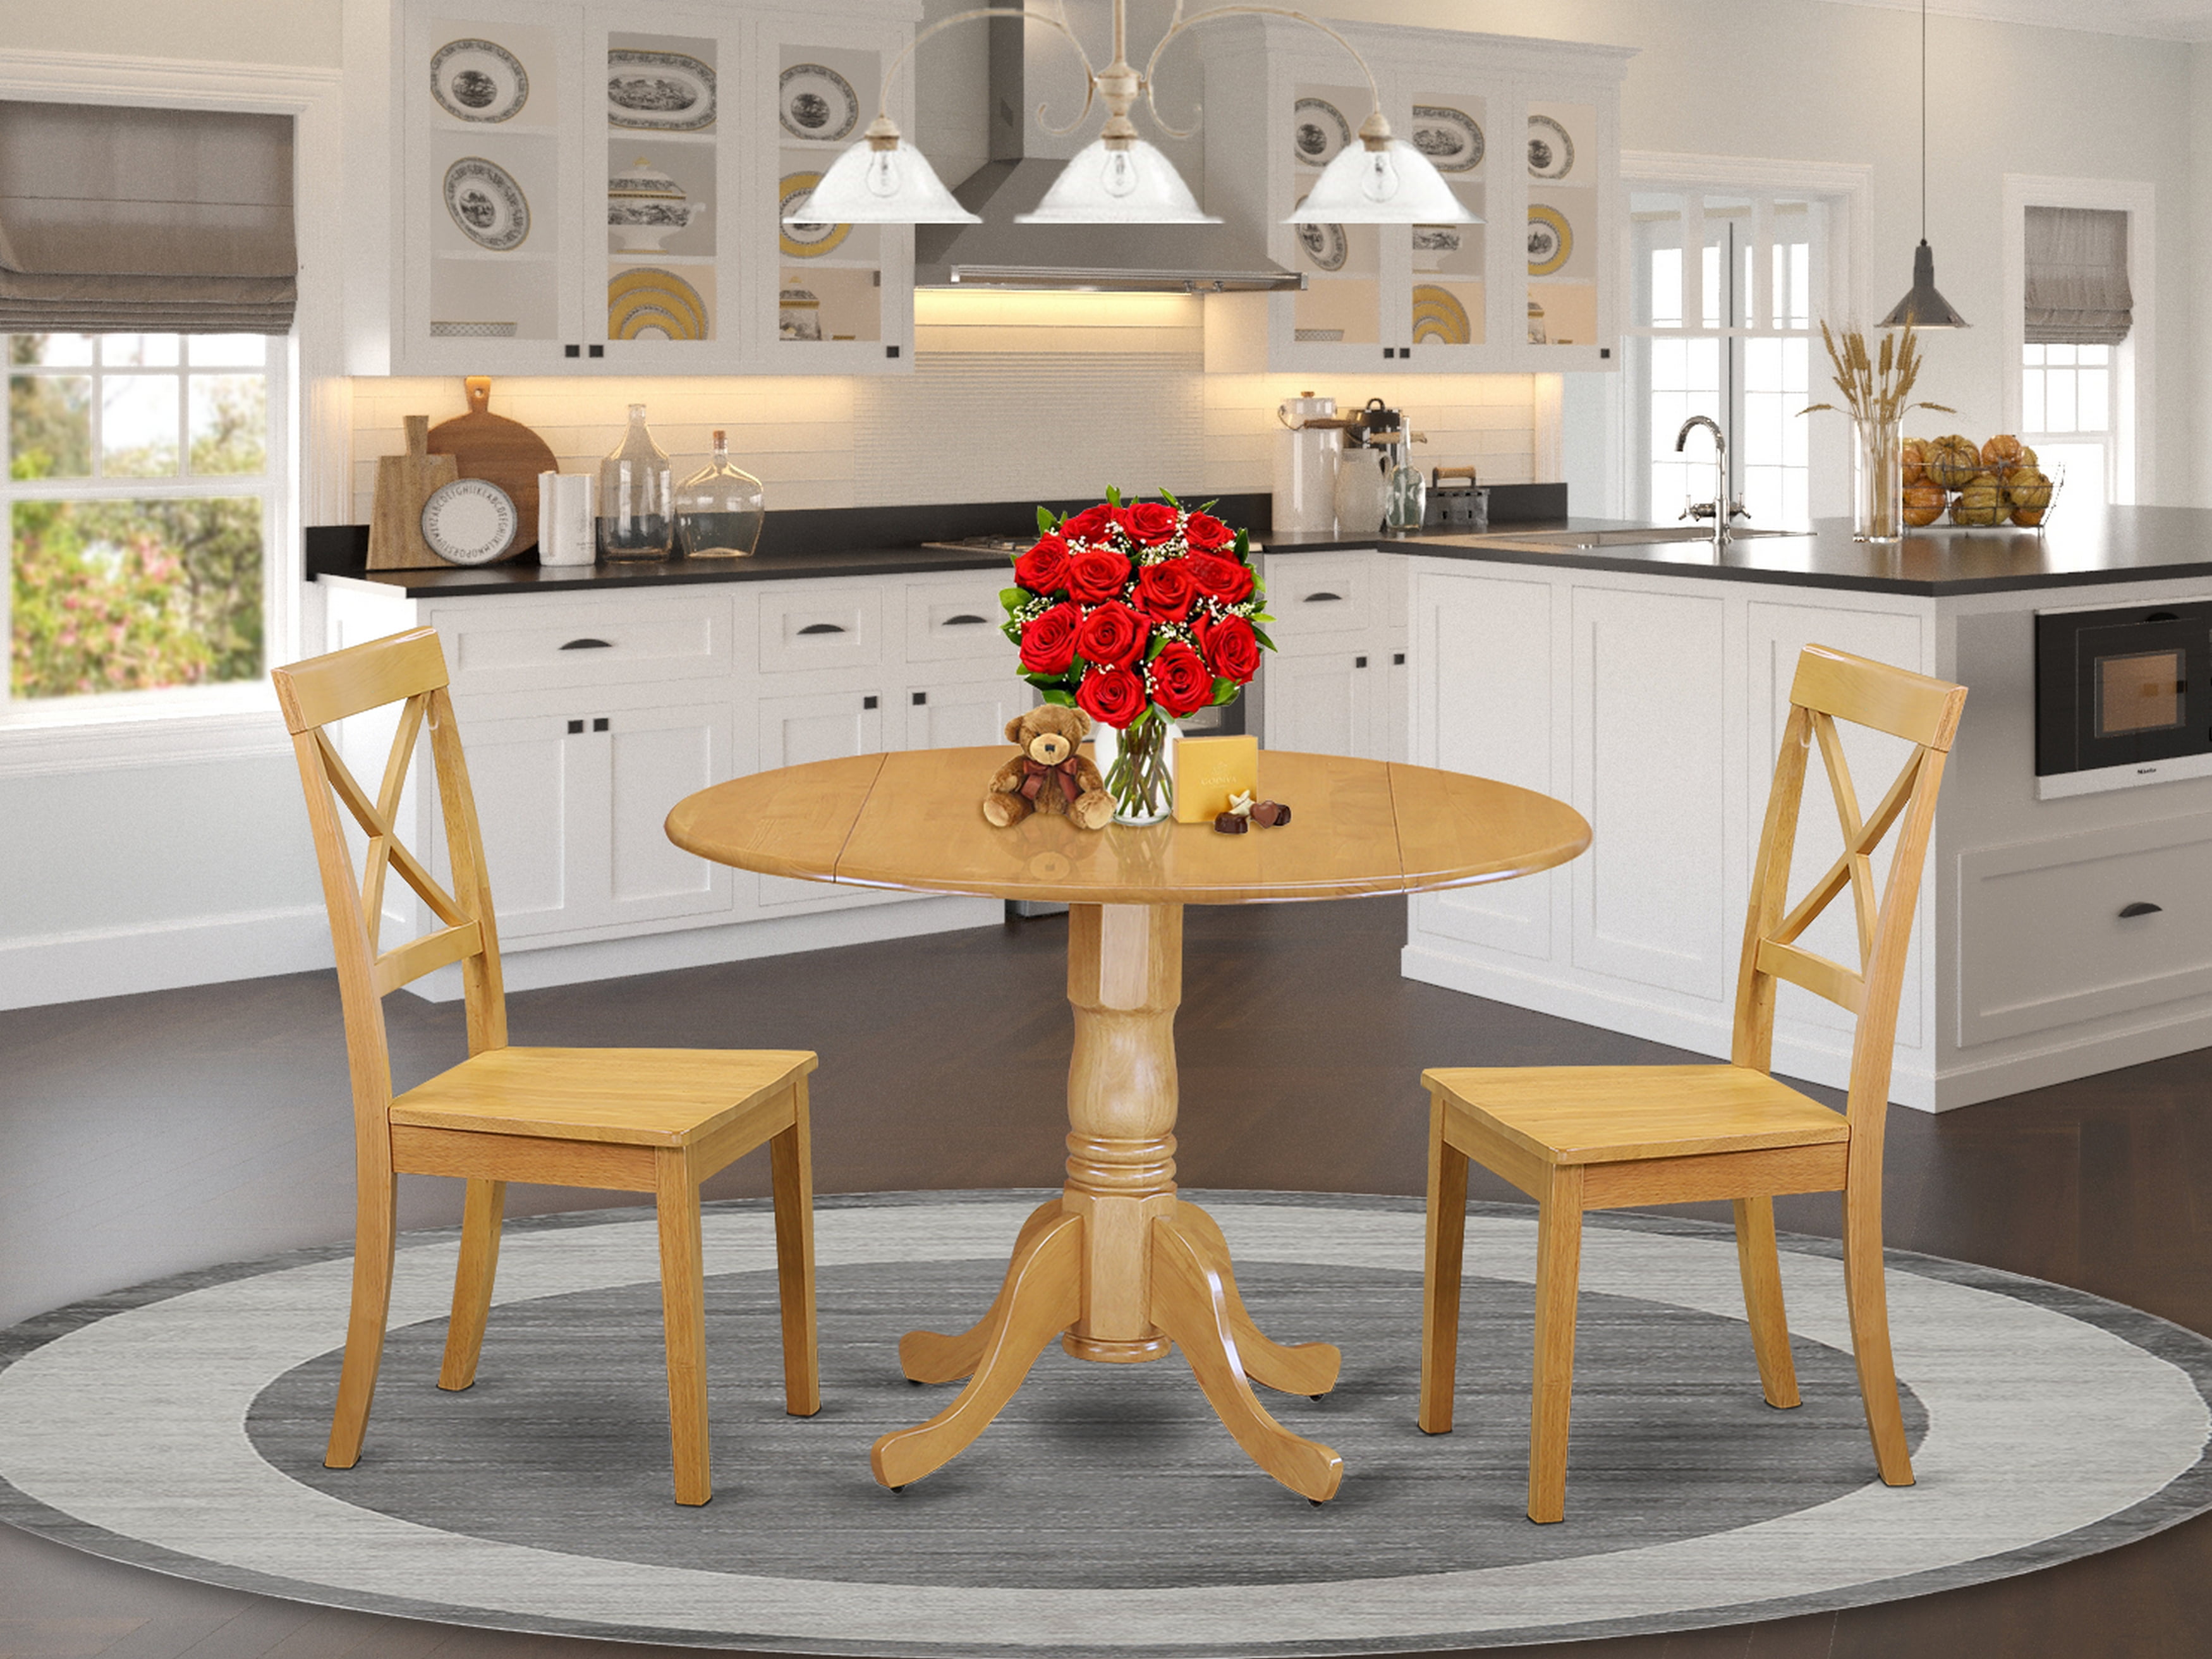 Details about   Kitchen Dining Set Compact Bistro Pub 2 Chairs Coated Iron Pipes and Table Top 